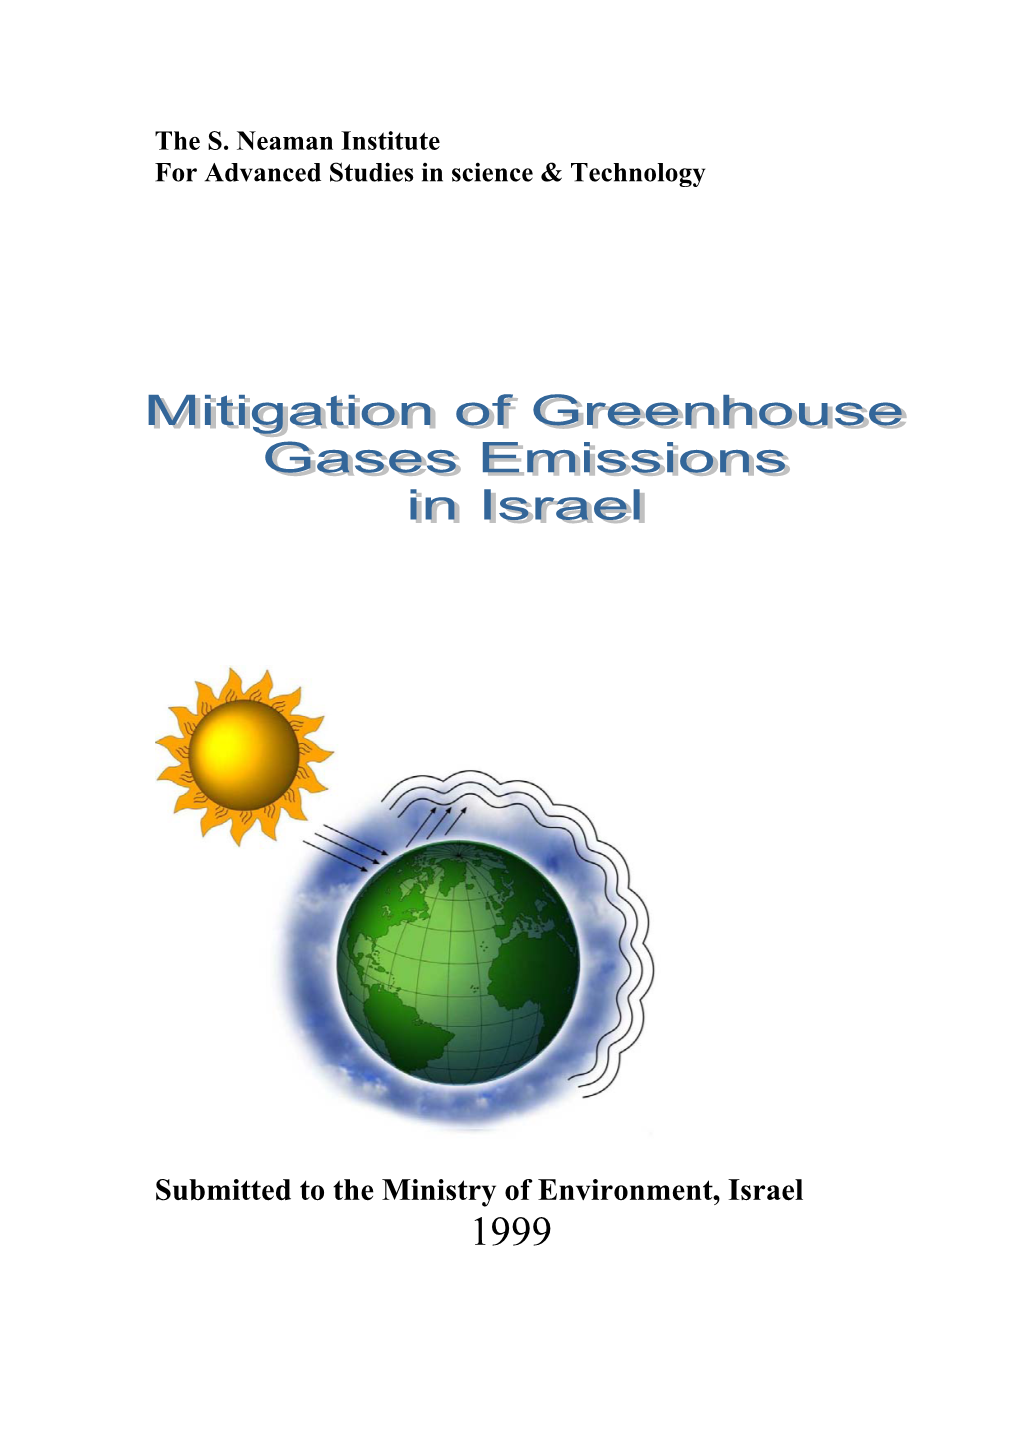 Submitted to the Ministry of Environment, Israel 1999